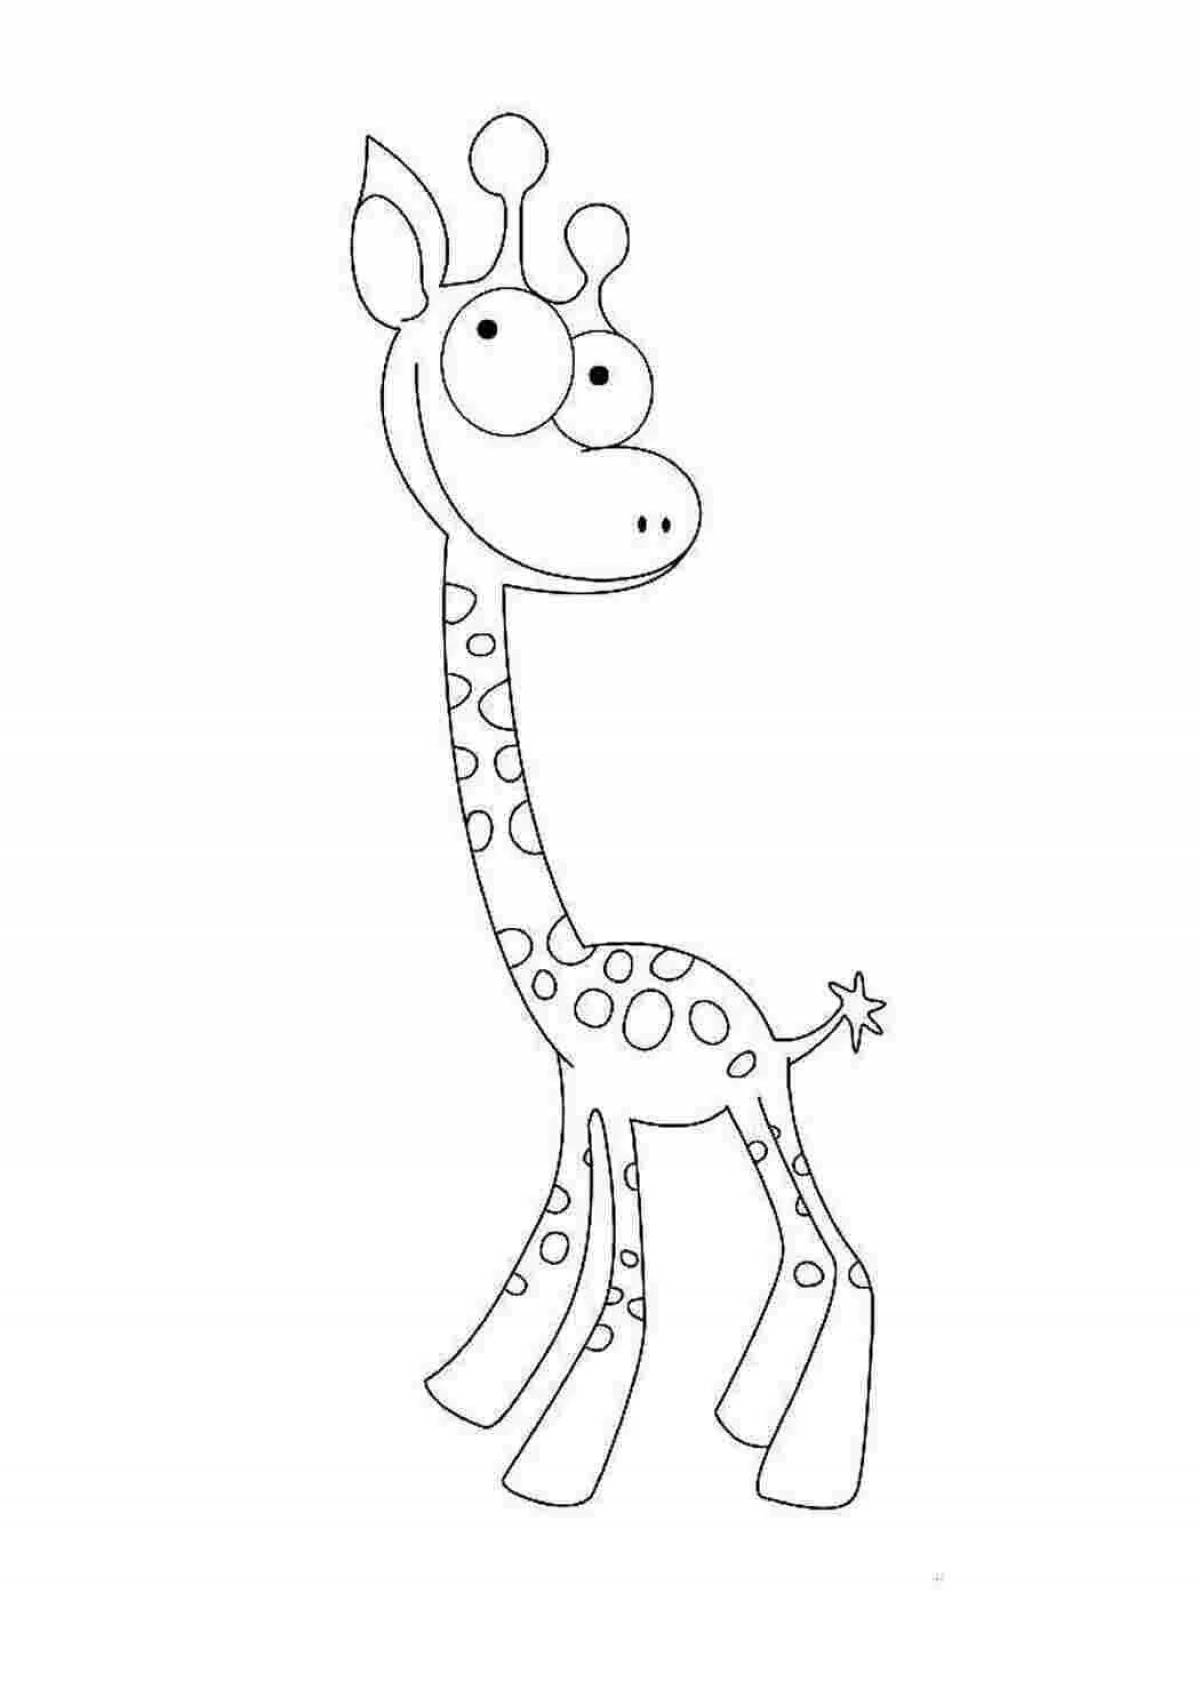 Fairy coloring giraffe for children 6-7 years old